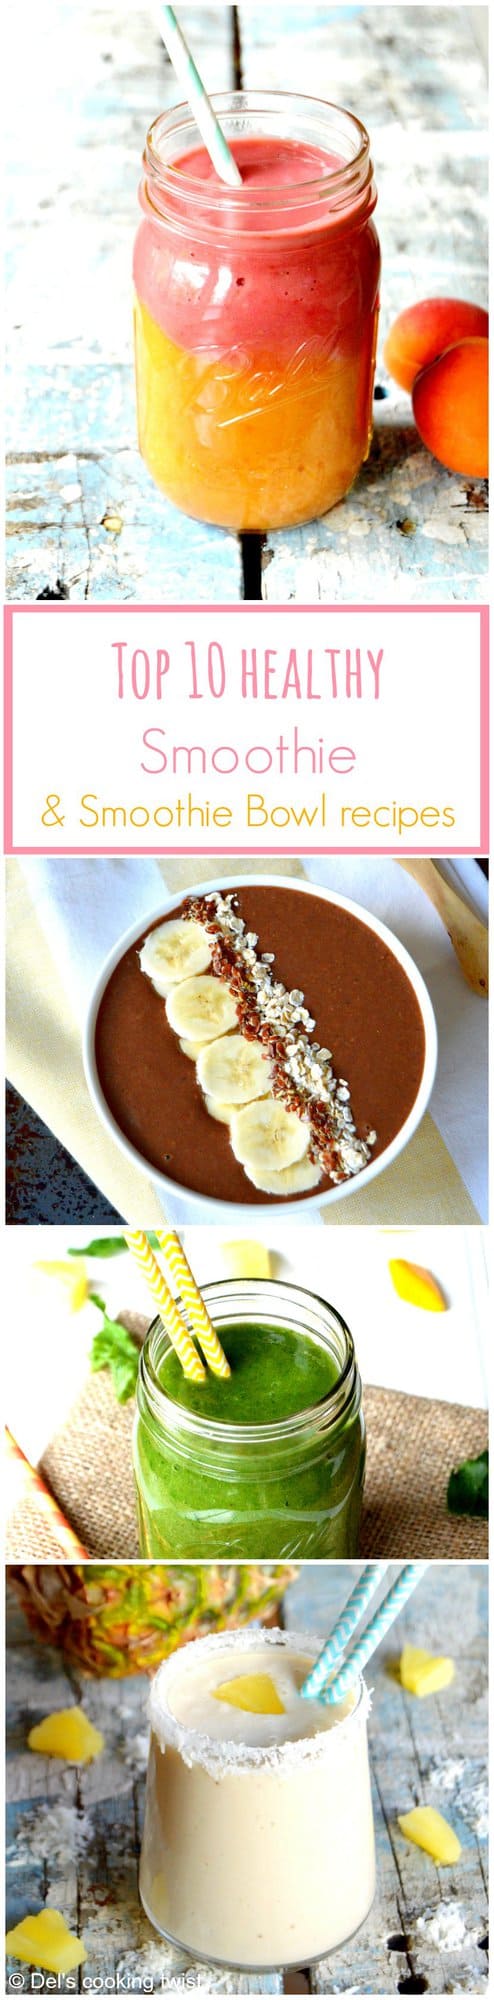 Top 10 healthy smoothies2_Pinterest